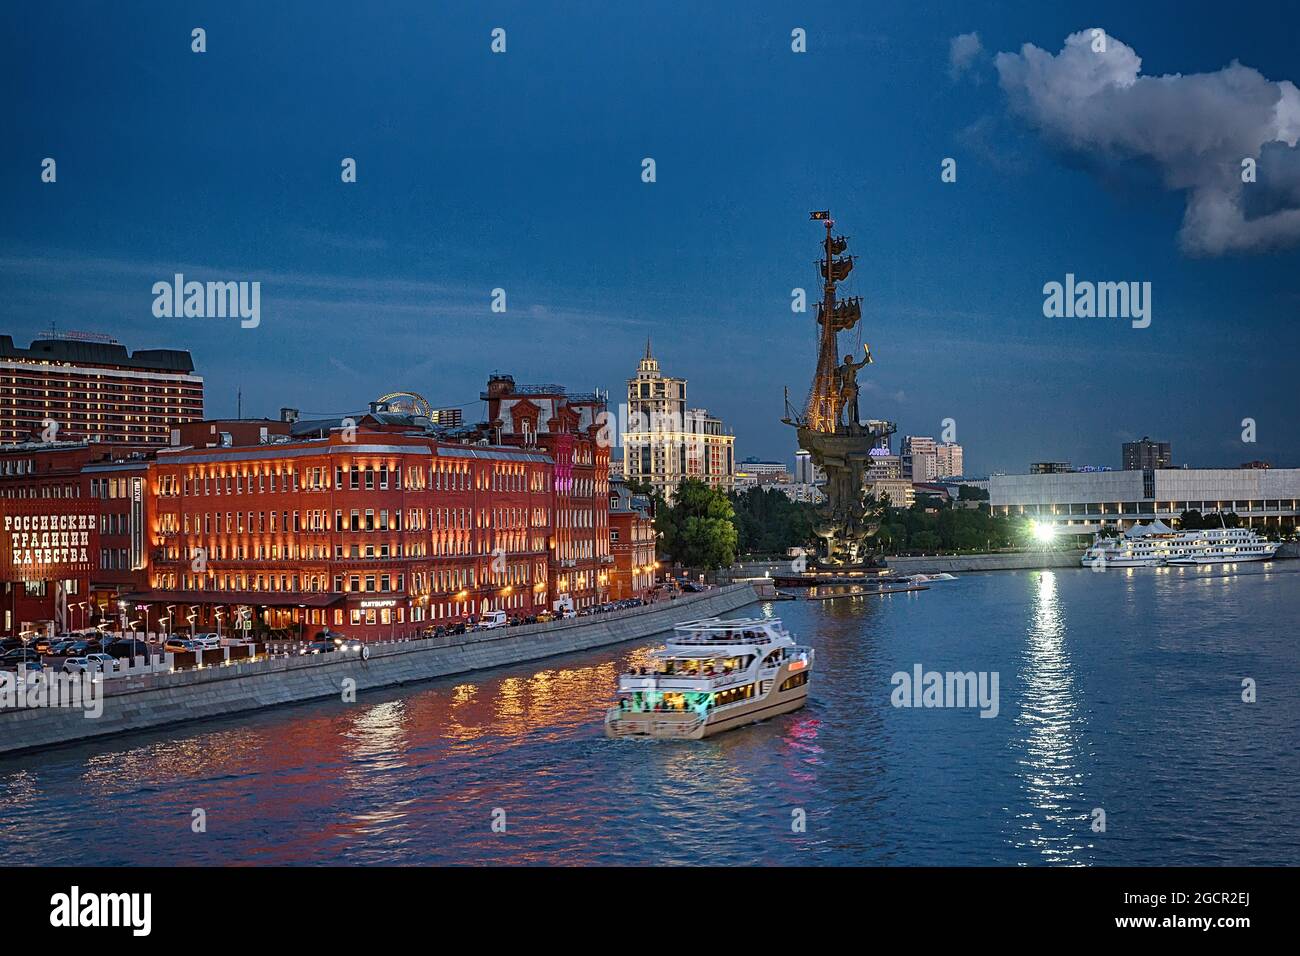 Boat trip on the Moscva river at night, Moscow, Russia Stock Photo